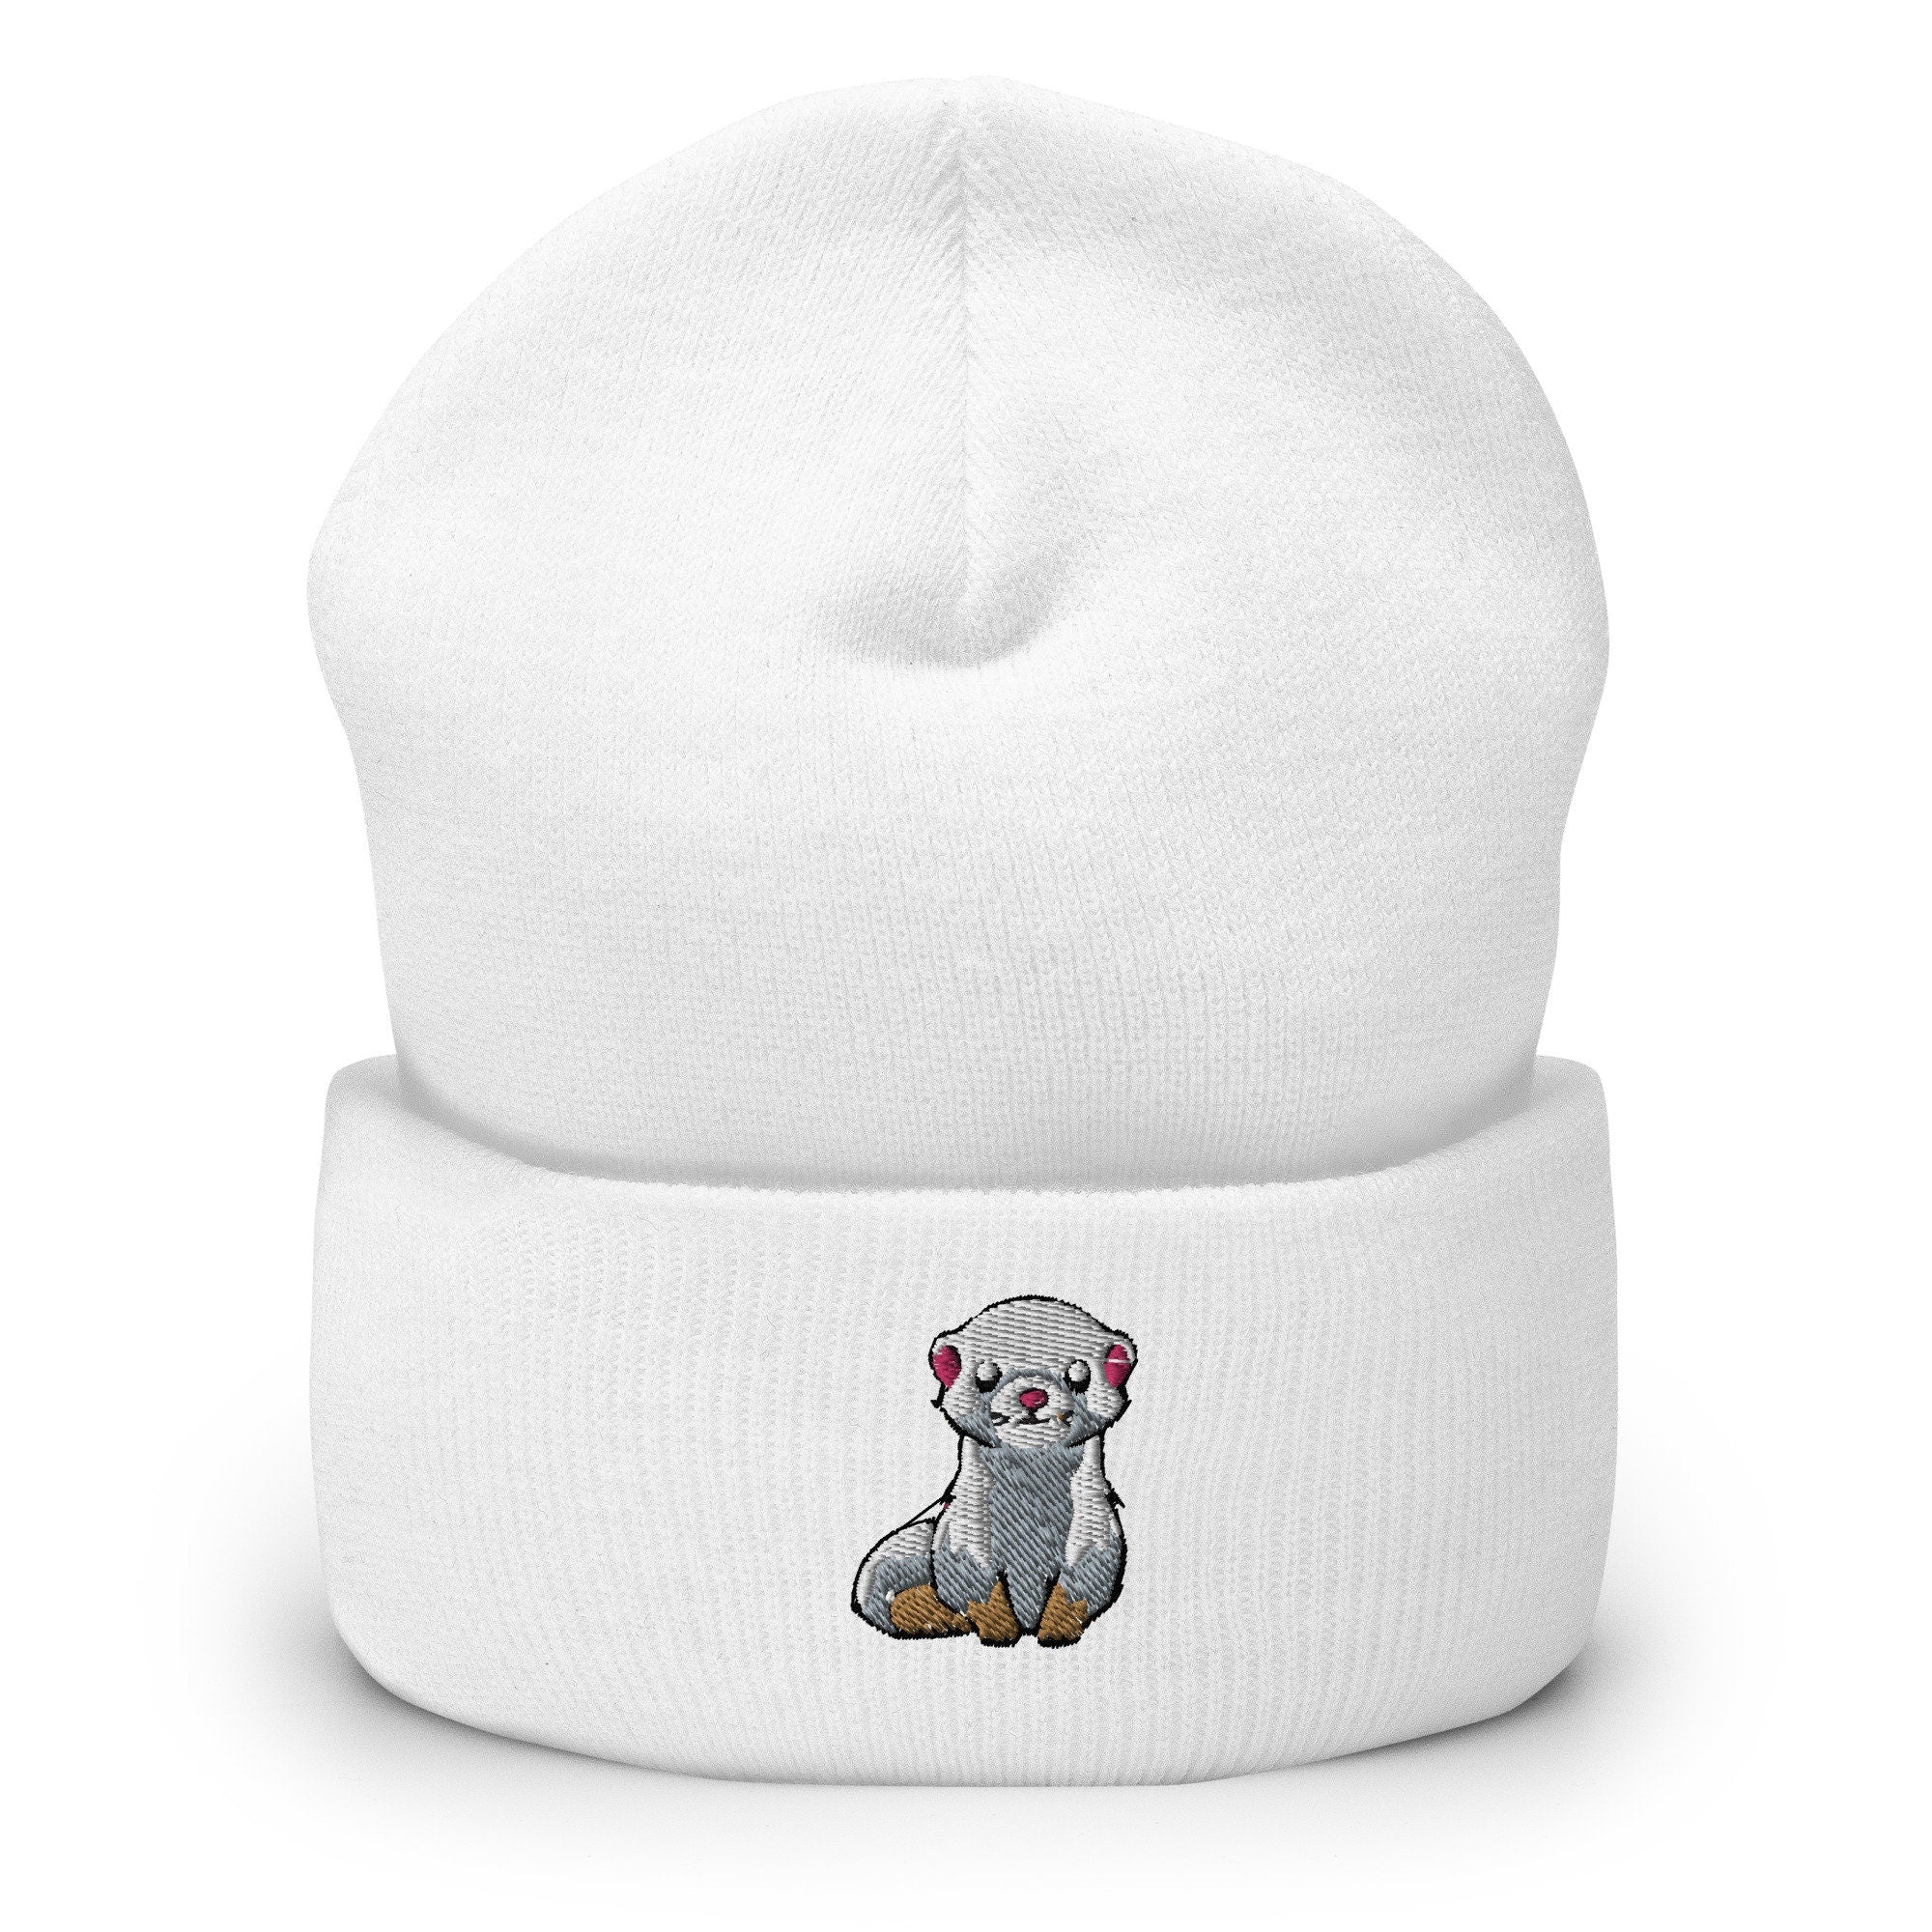 Ferret Embroidered Beanie, Handmade Cuffed Knit Unisex Slouchy Adult Winter Hat Cap Gift